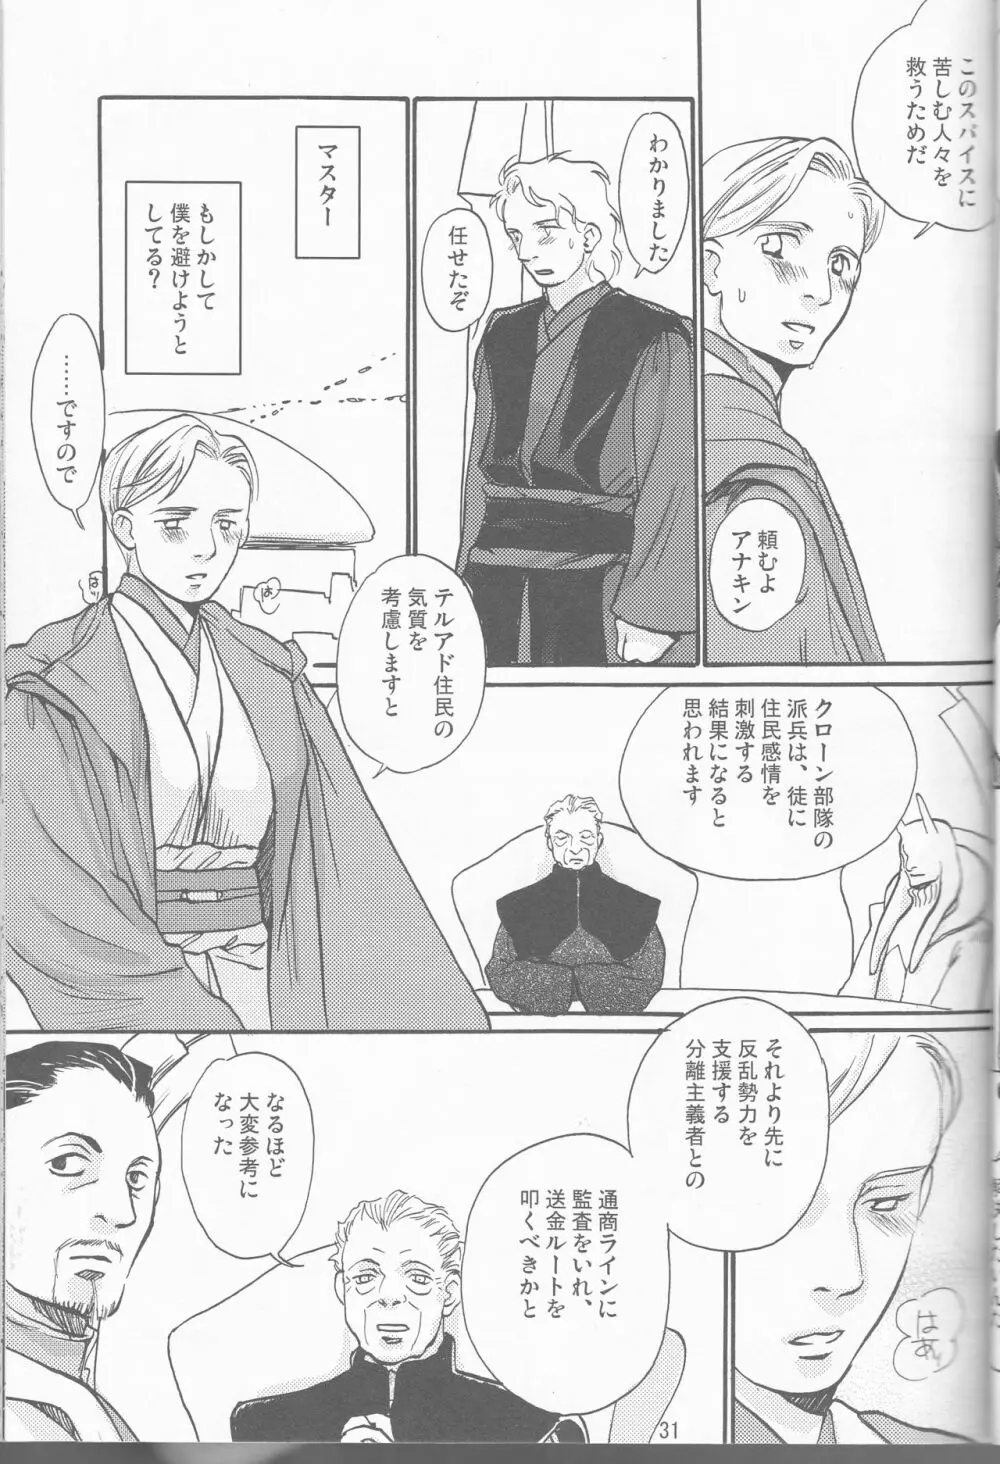 Obi Female Transformation Book 1 of 2 - page31